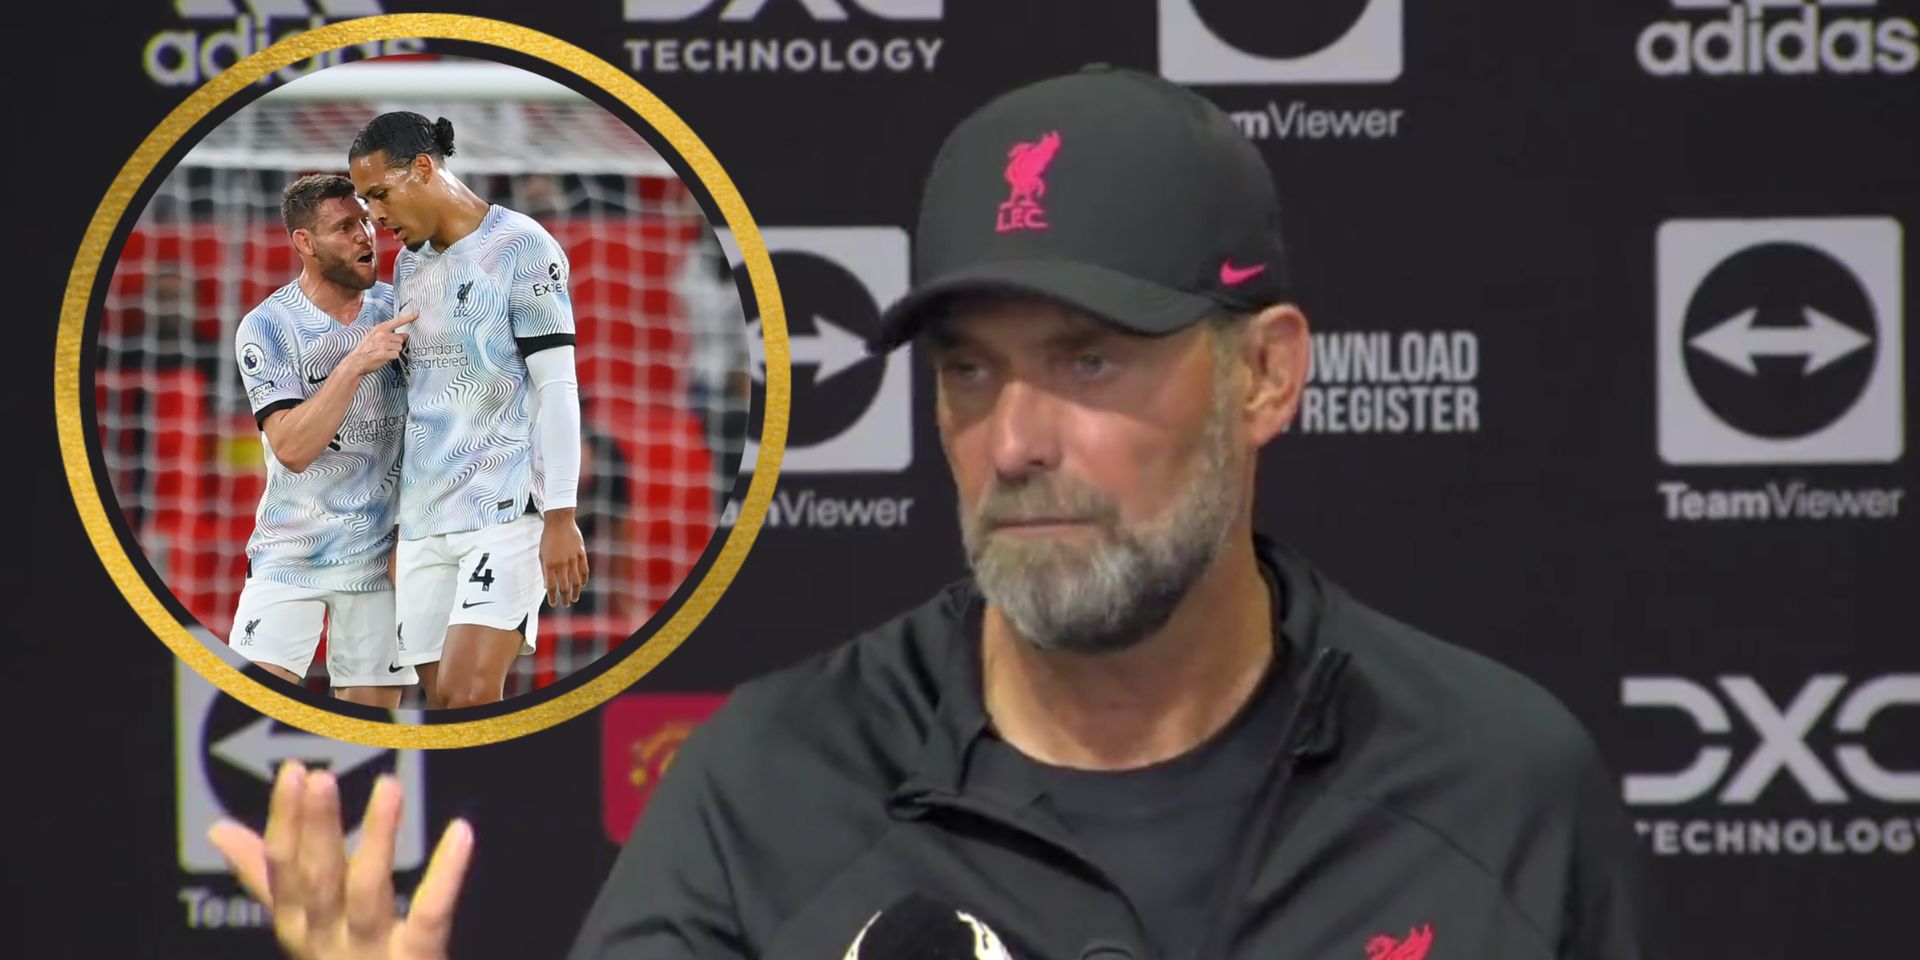 (Video) Jurgen Klopp gives his thoughts on the on-pitch altercation between Virgil van Dijk and James Milner at Old Trafford